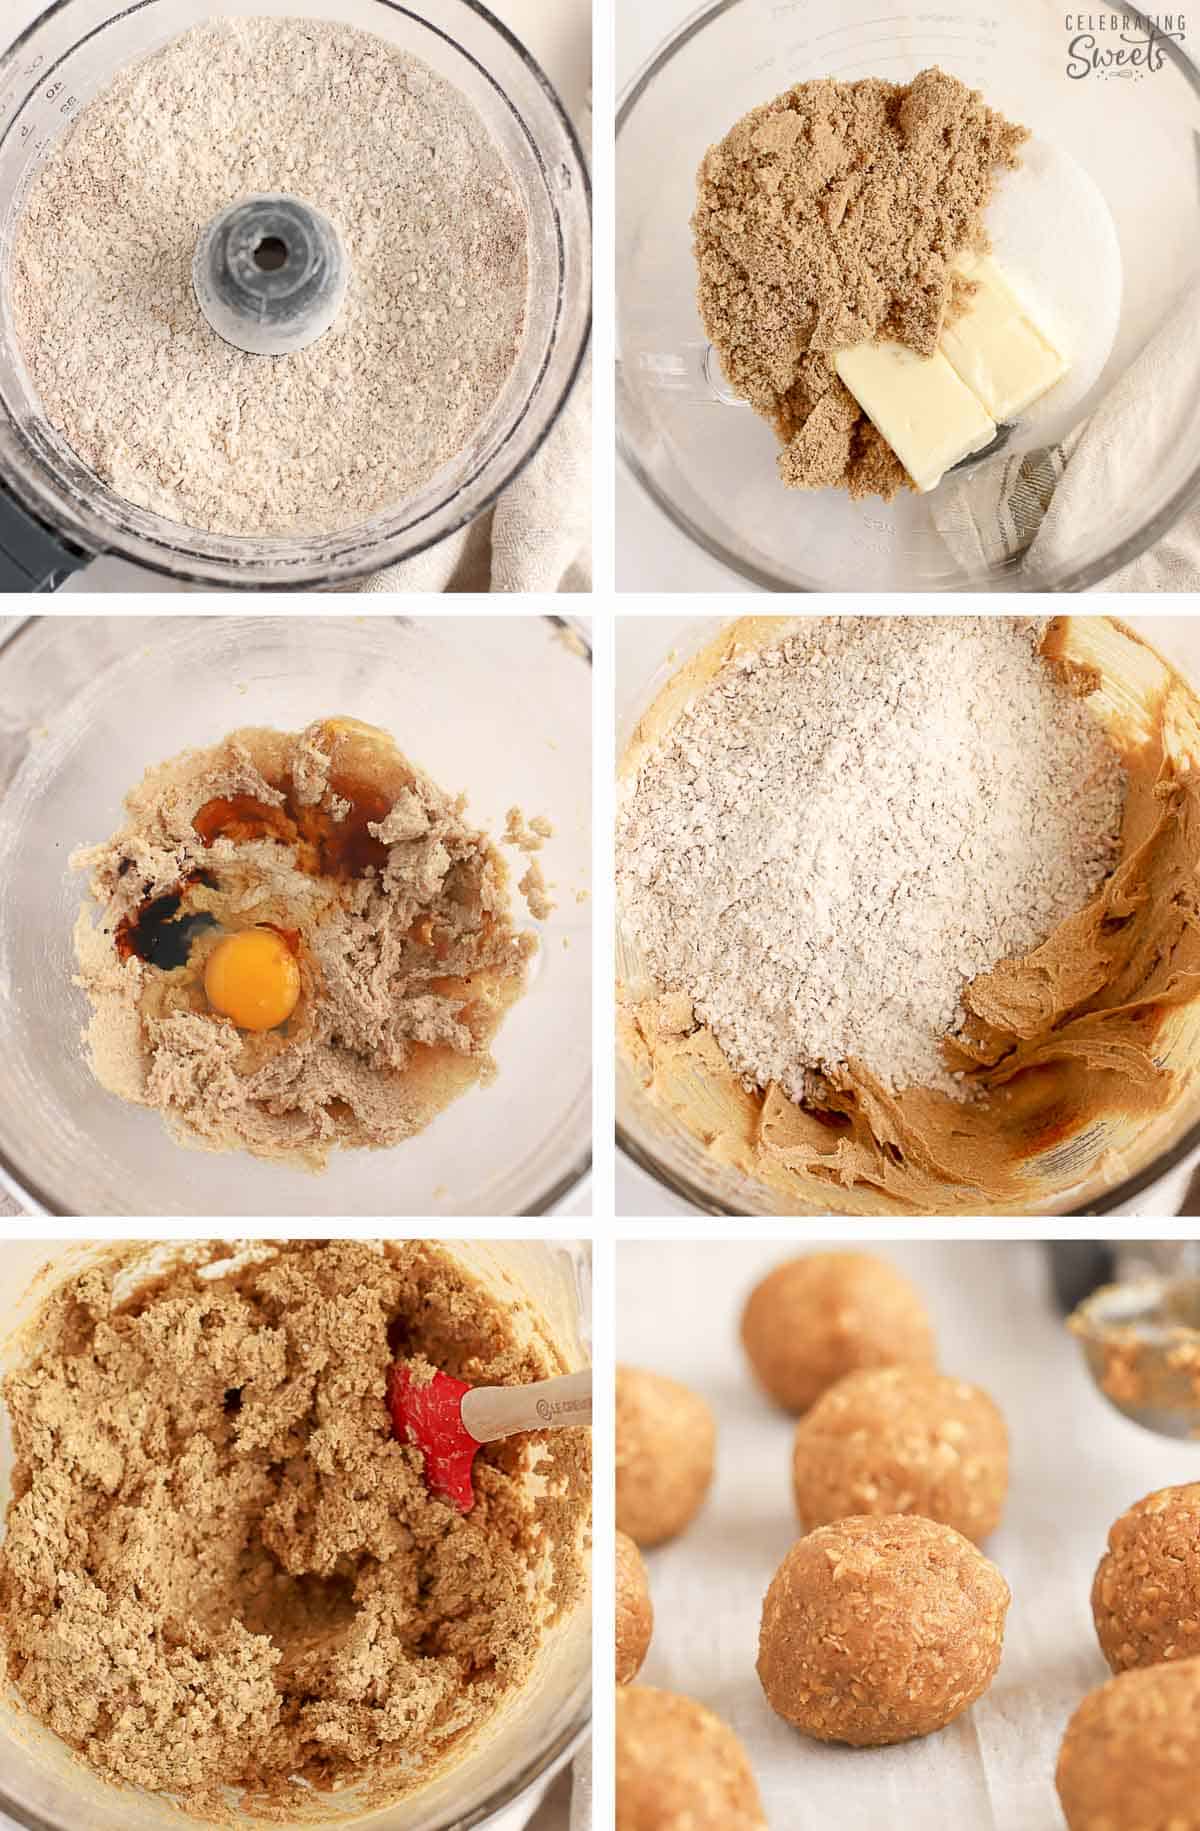 Collage of oatmeal cookie dough in a large glass bowl and oatmeal cookie dough balls on a baking sheet.